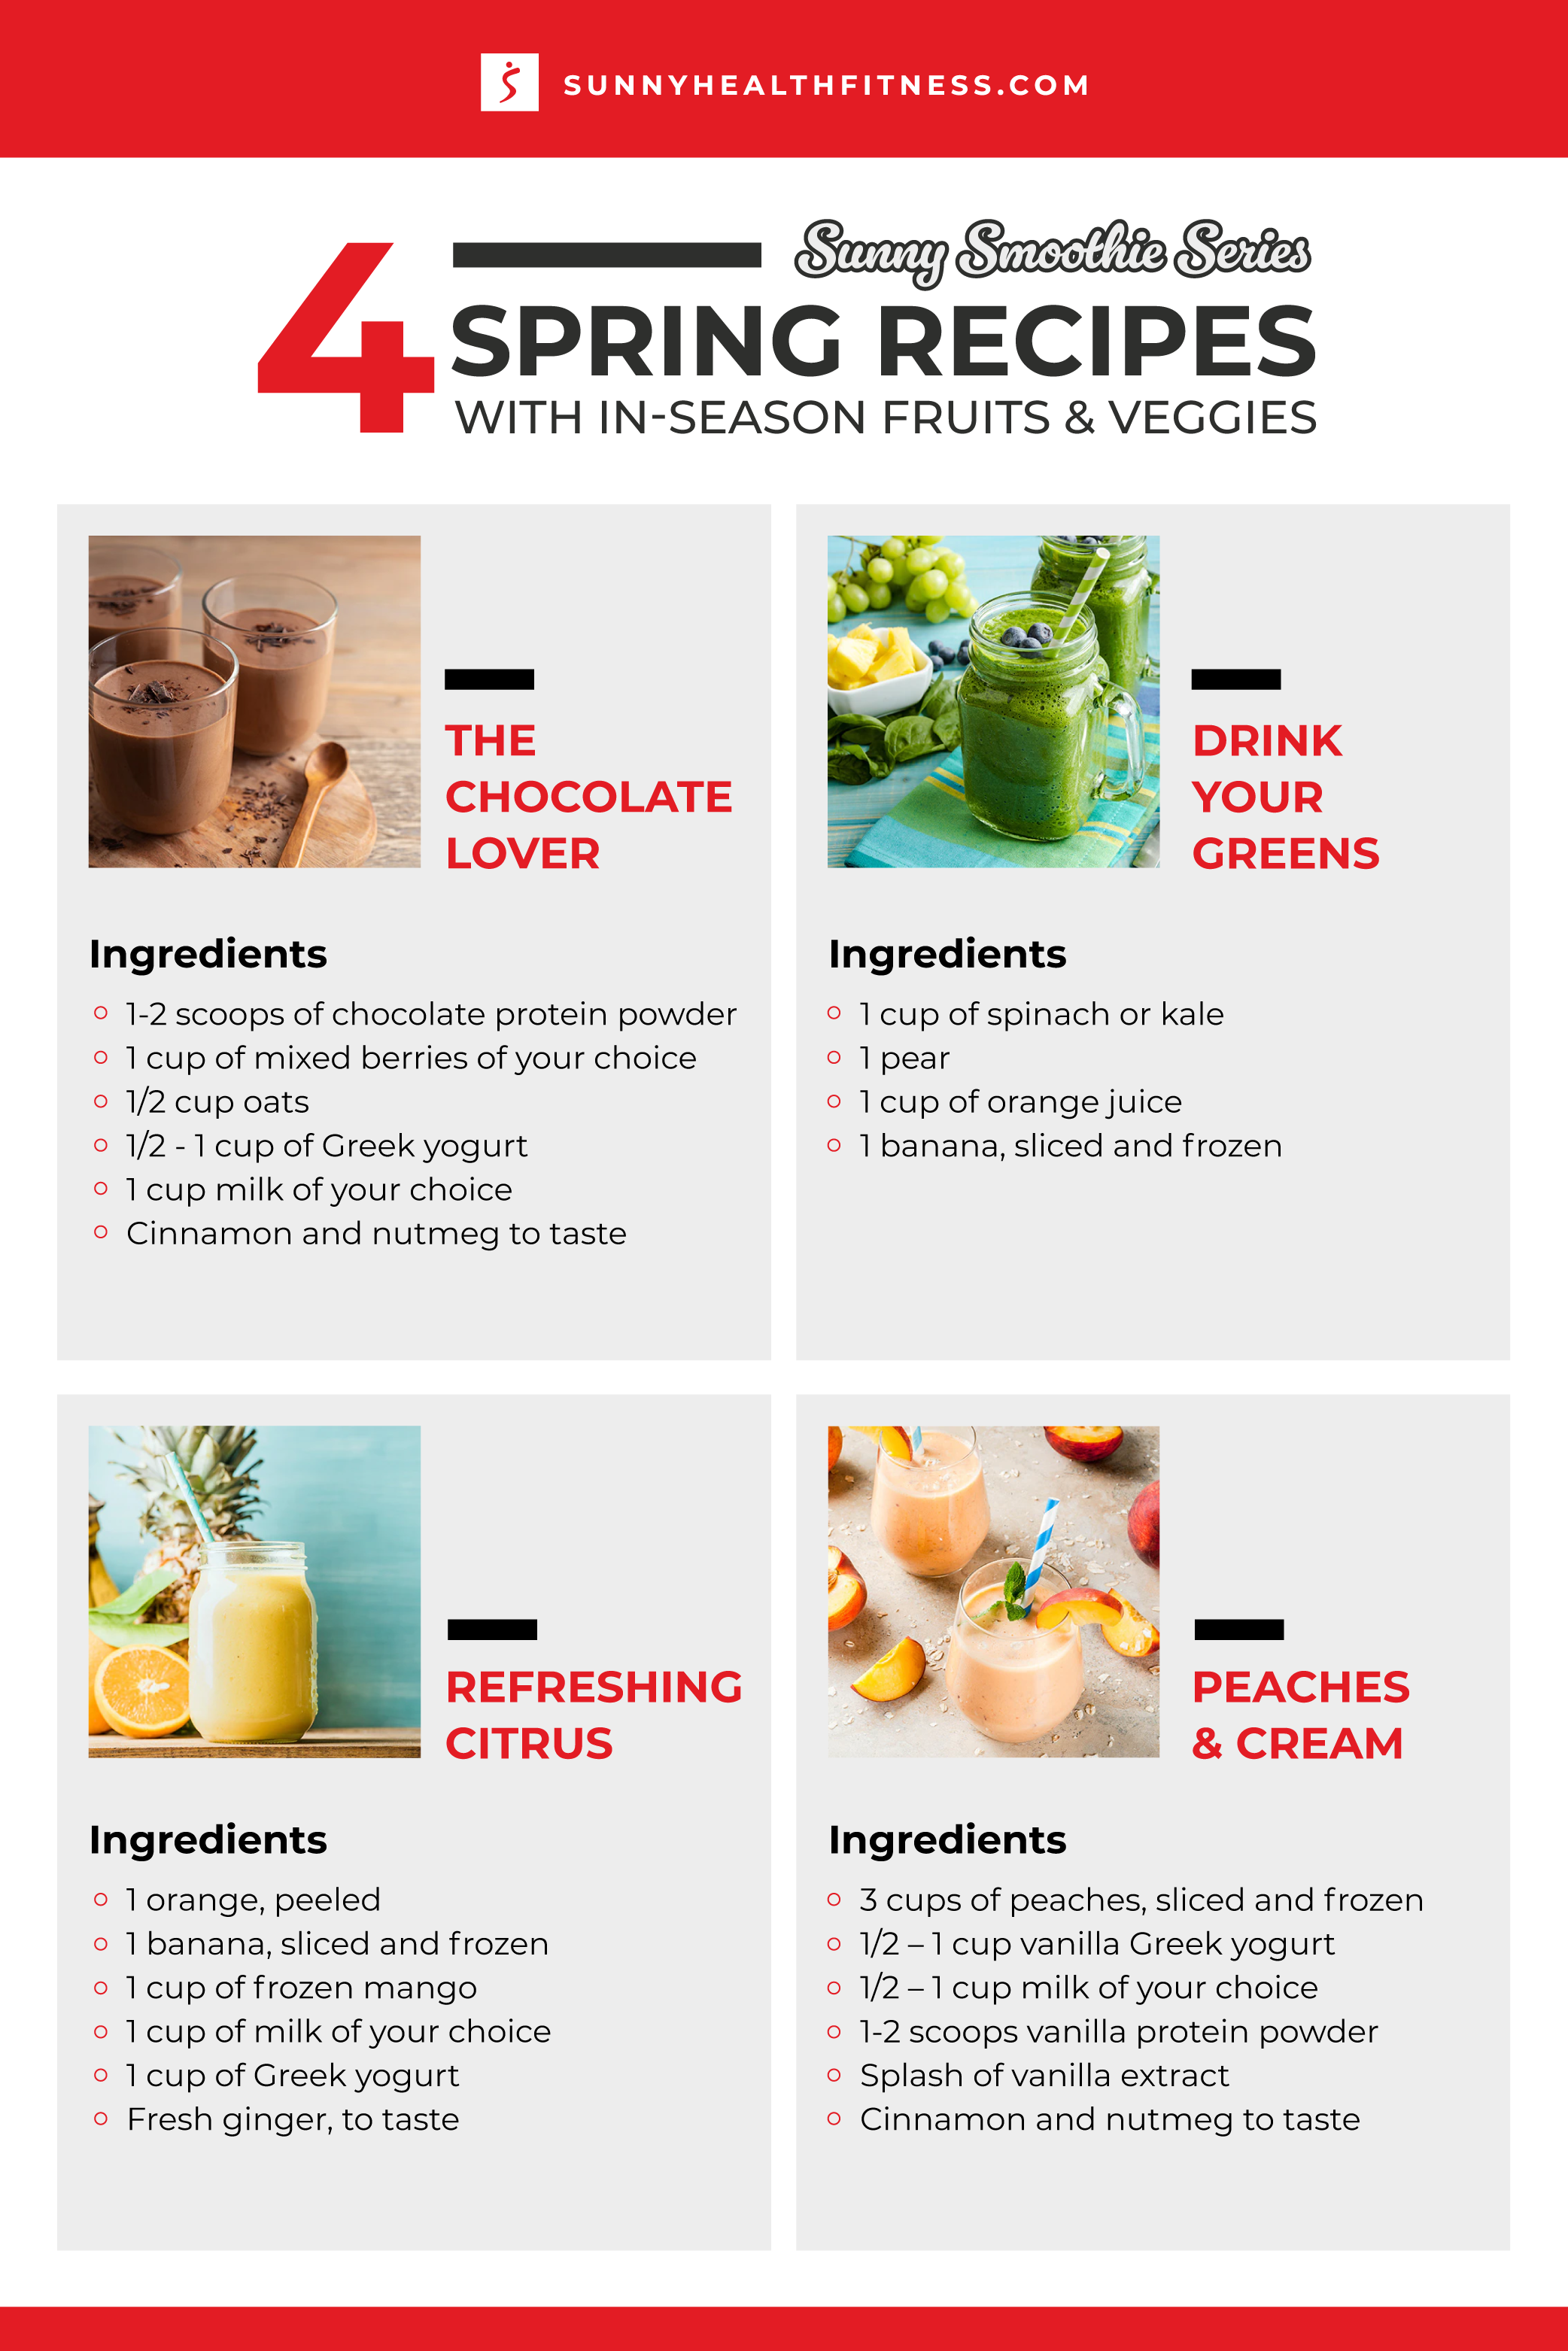 Smoothie Series: Spring Recipes with In-Season Fruits & Veggies Infographic